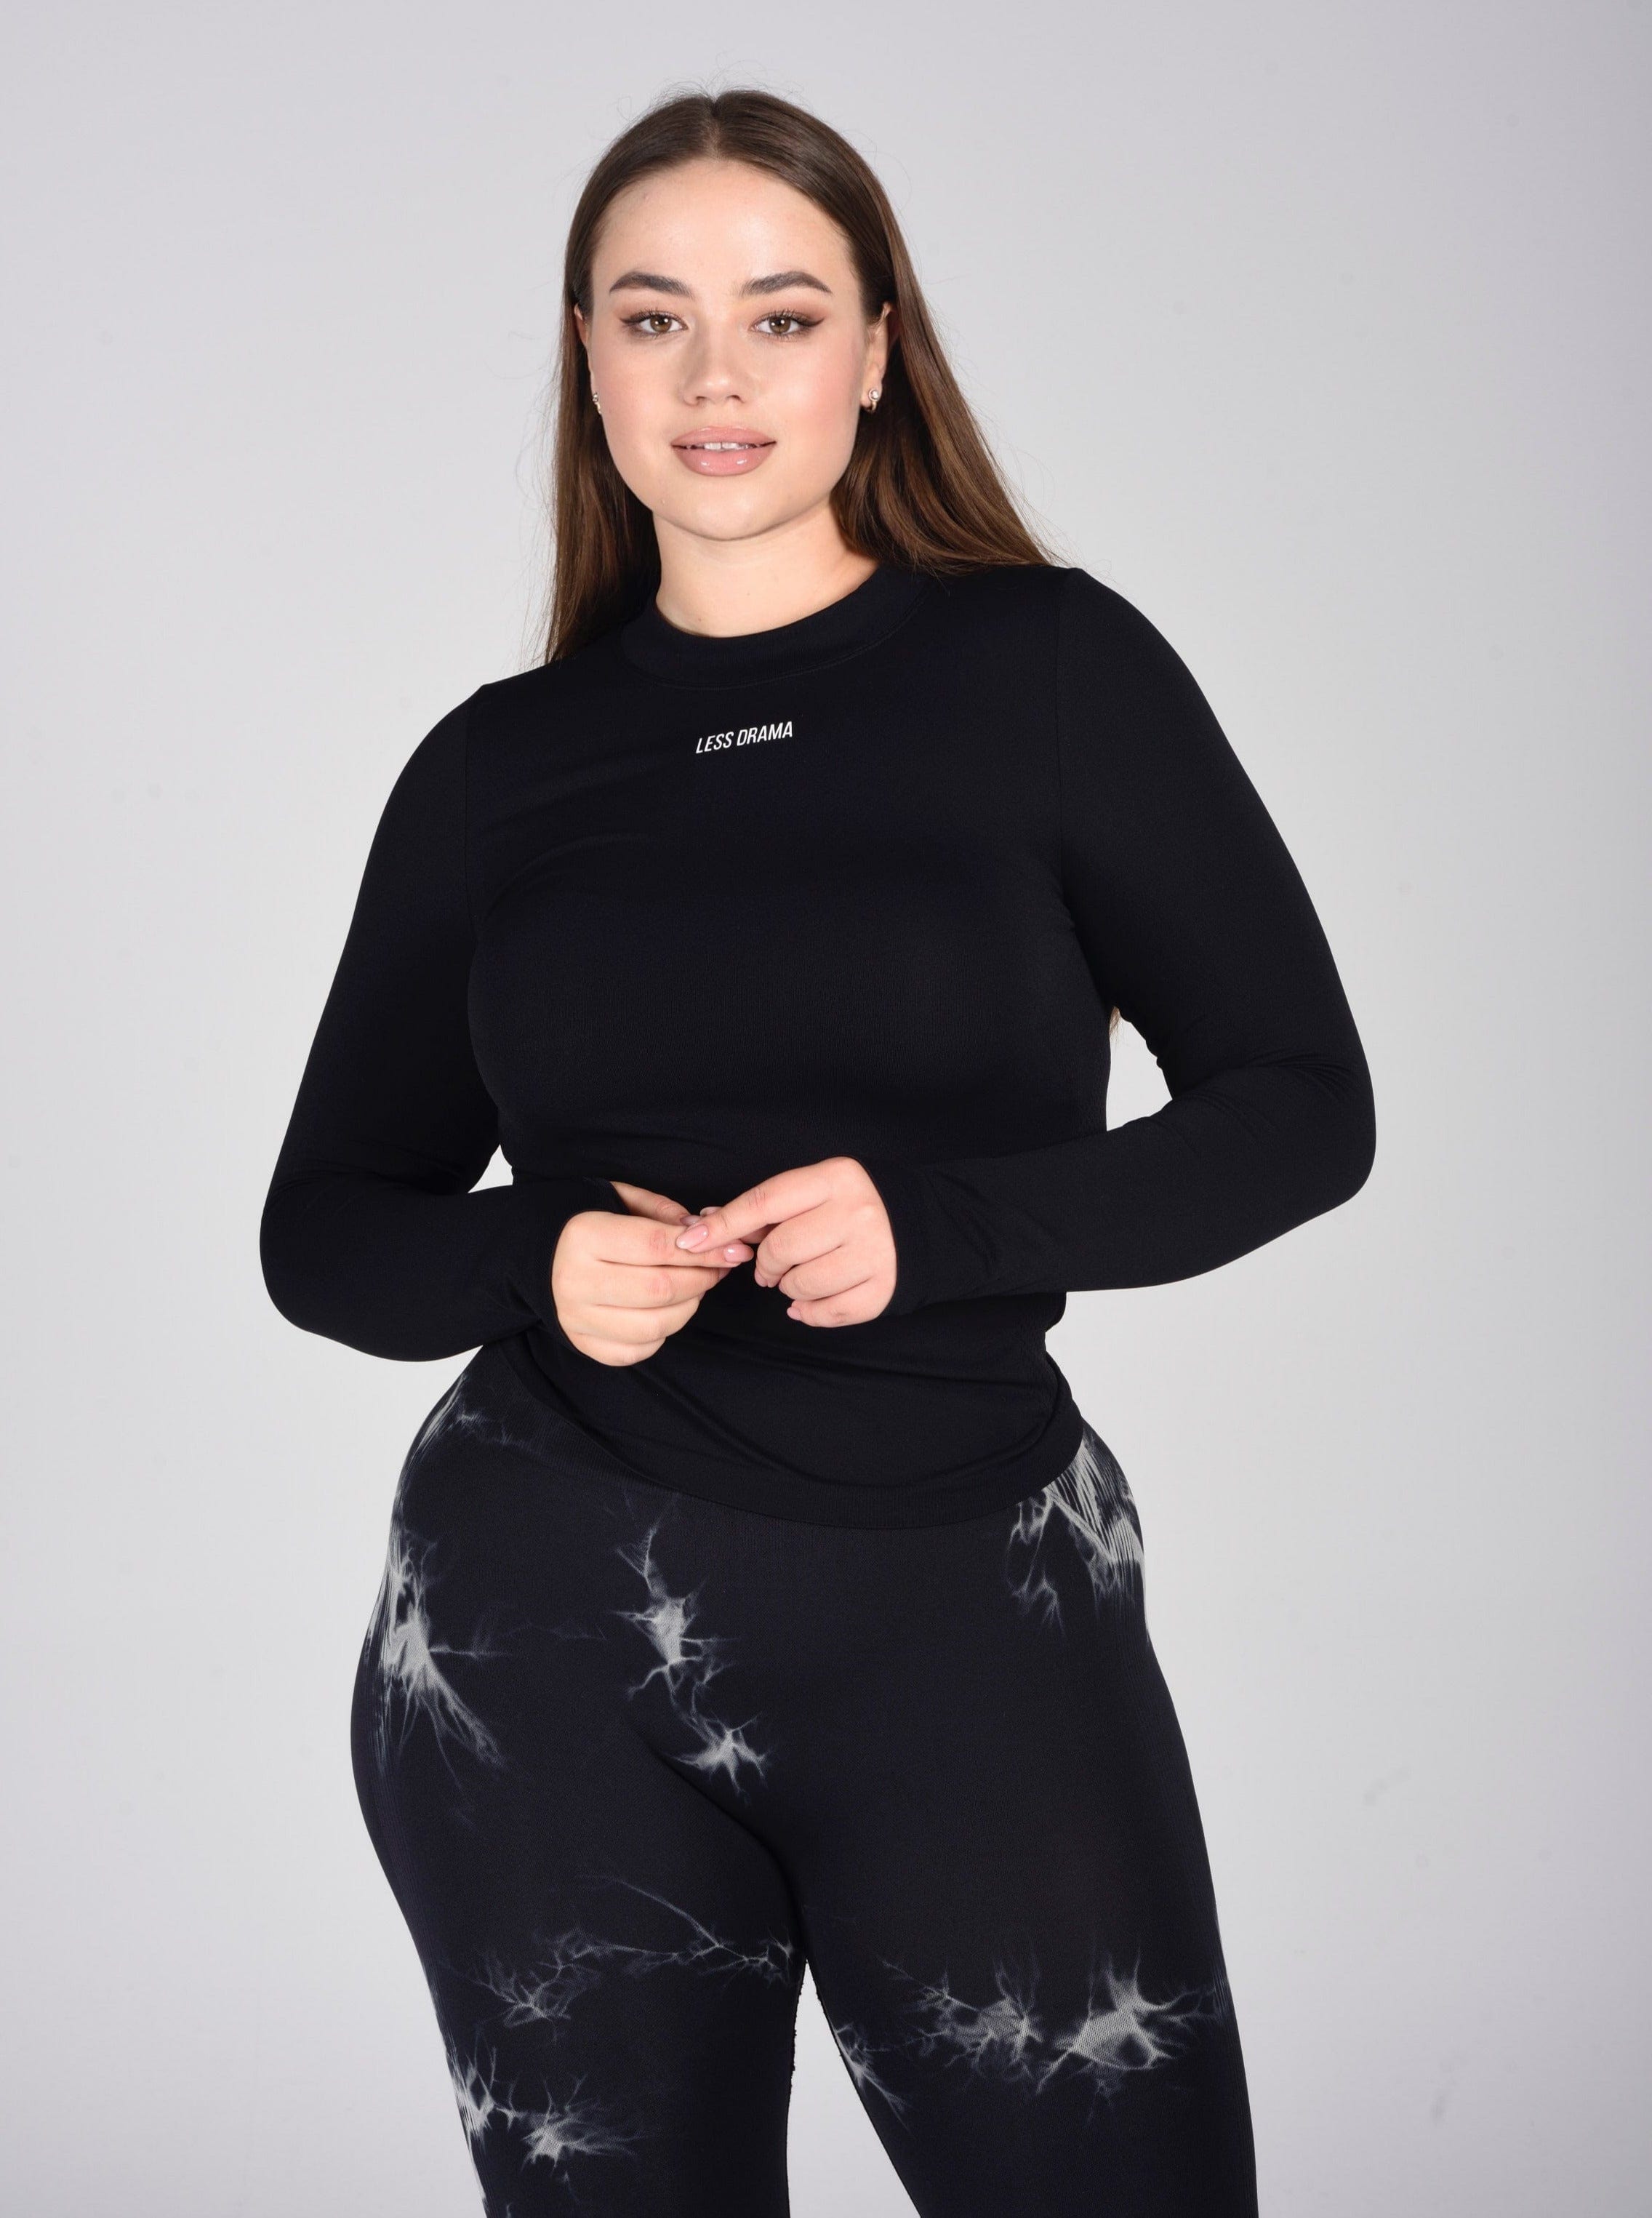 Unbothered Long Sleeve Top - Black